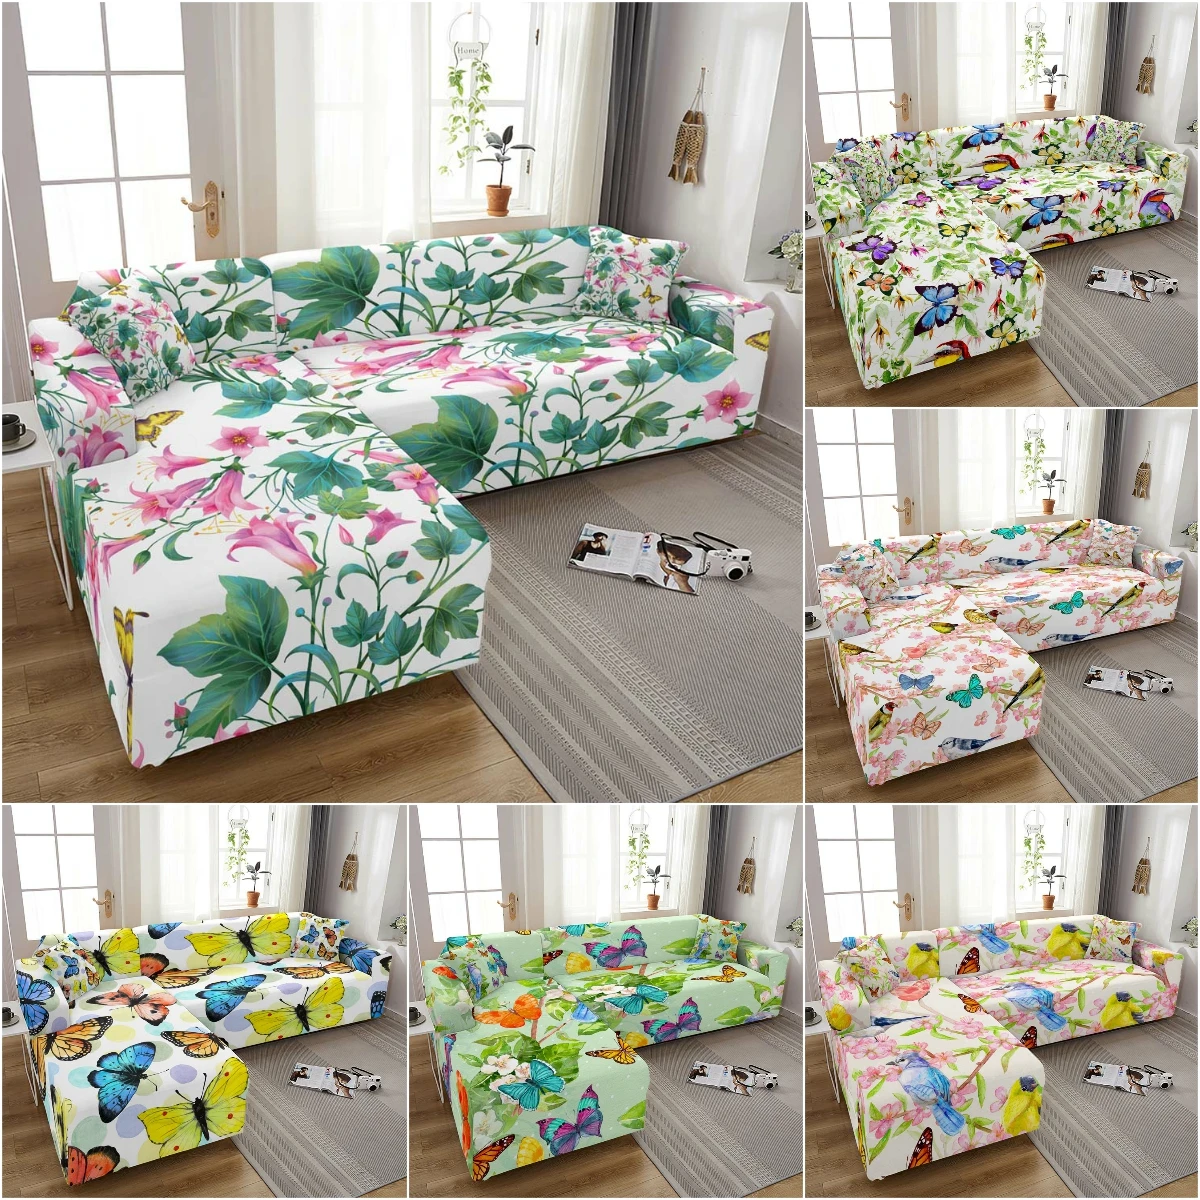 Butterfly Printed Sofa Cover For Living Room Spandex All-Inclusive Wrap Sectional Couch Cover Elastic Chair Slipcover 1-4 Seater